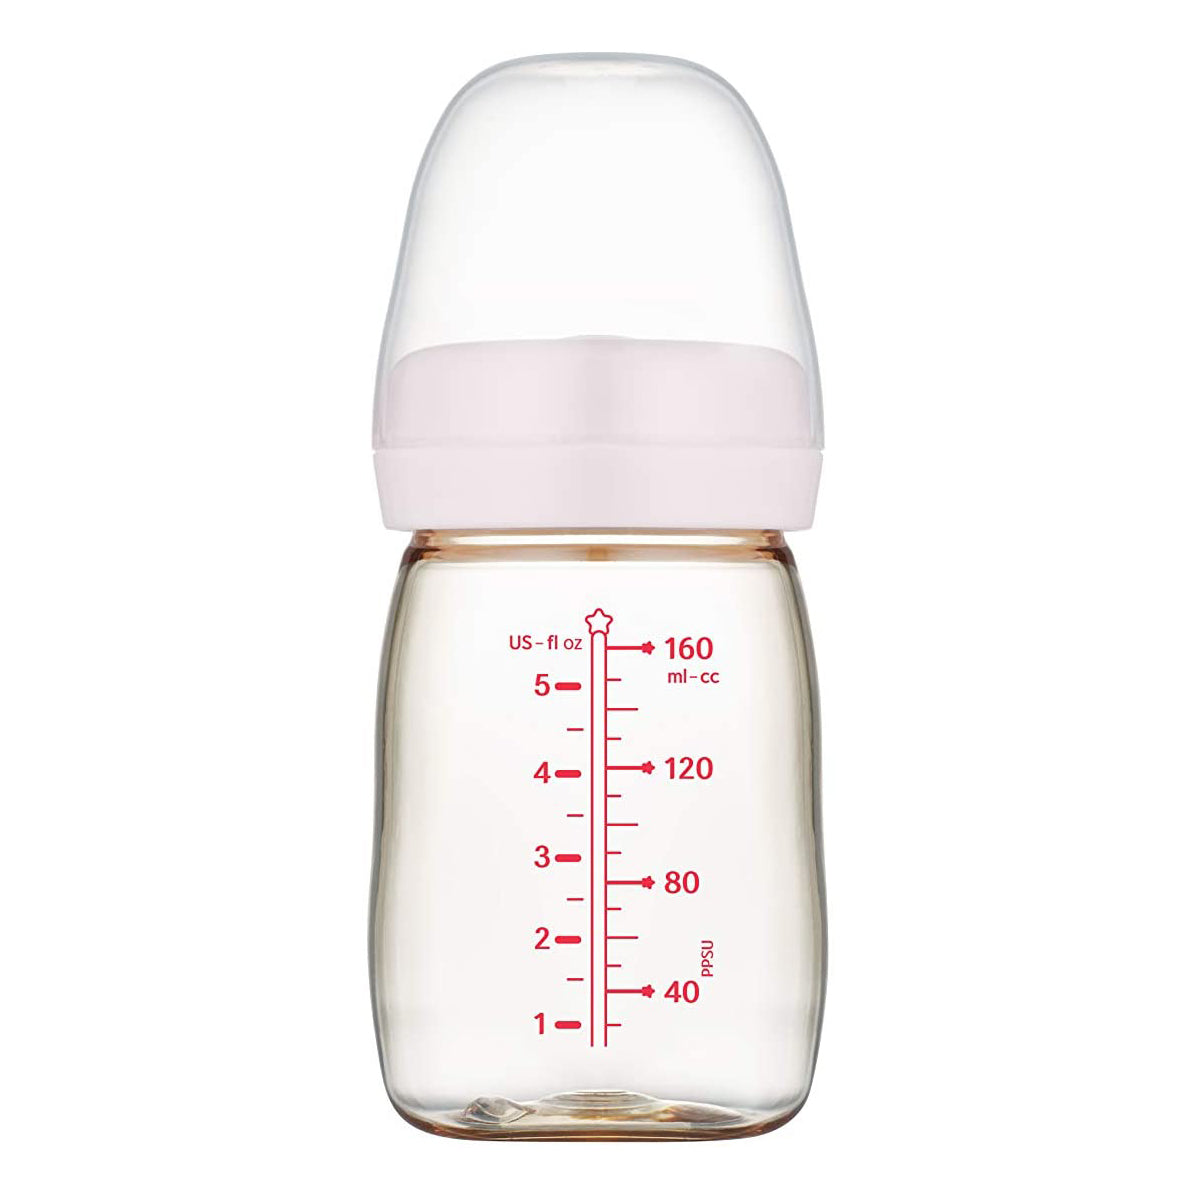 Premium PPSU Wide Neck Baby Bottle - 1 x 160ml Bottle with Slow Flow Teat - Designs May Vary  Spectra   